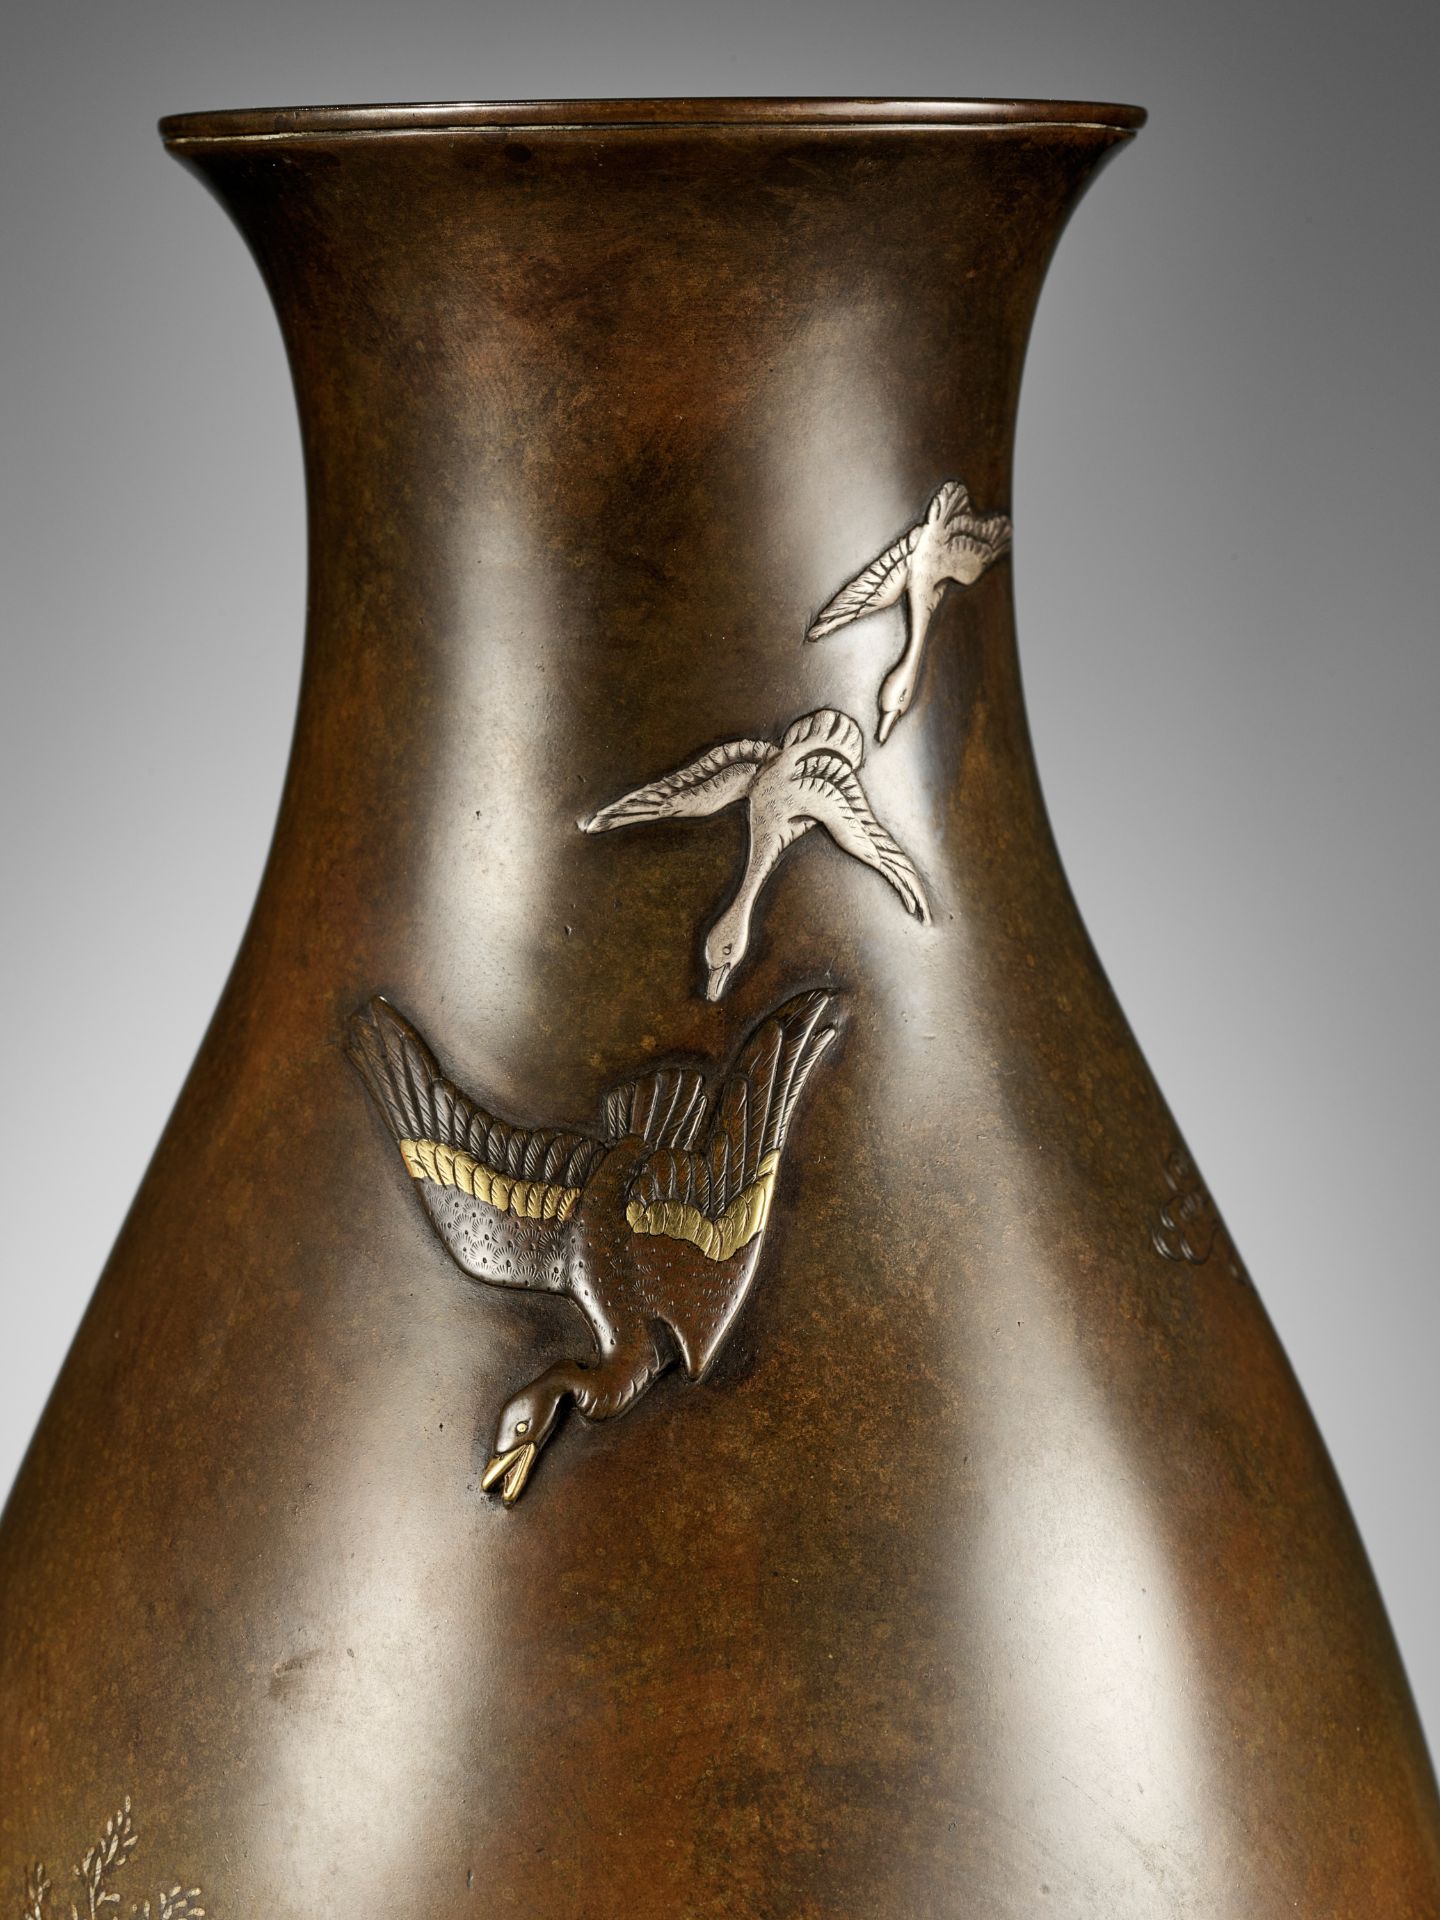 CHOMIN: A SUPERB PAIR OF INLAID BRONZE VASES WITH MINOGAME AND GEESE - Image 3 of 11